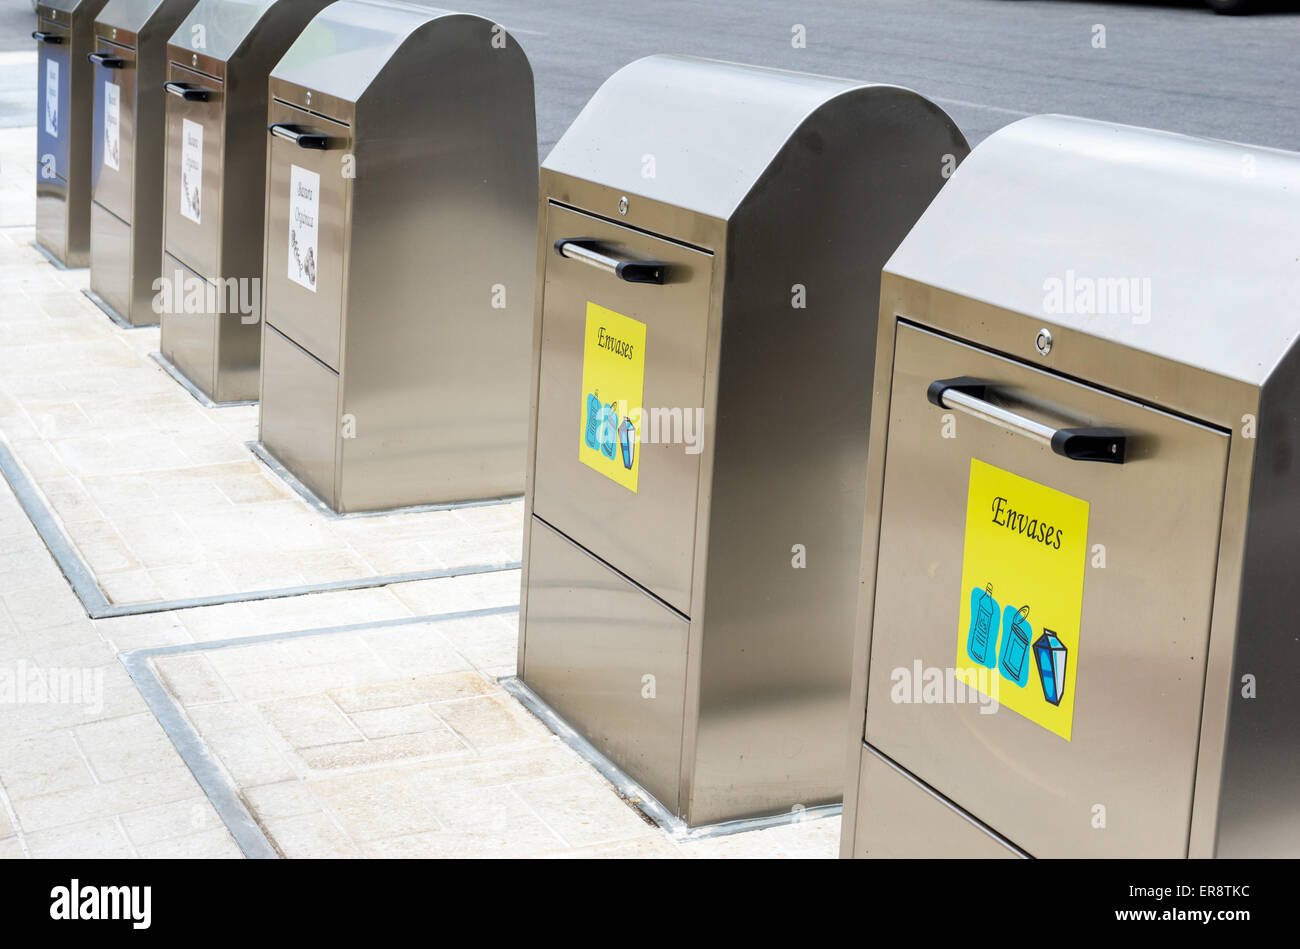 Newly sited environmental recycling containers on a pavement or sidewalk in Spain Europe. Stock Photo